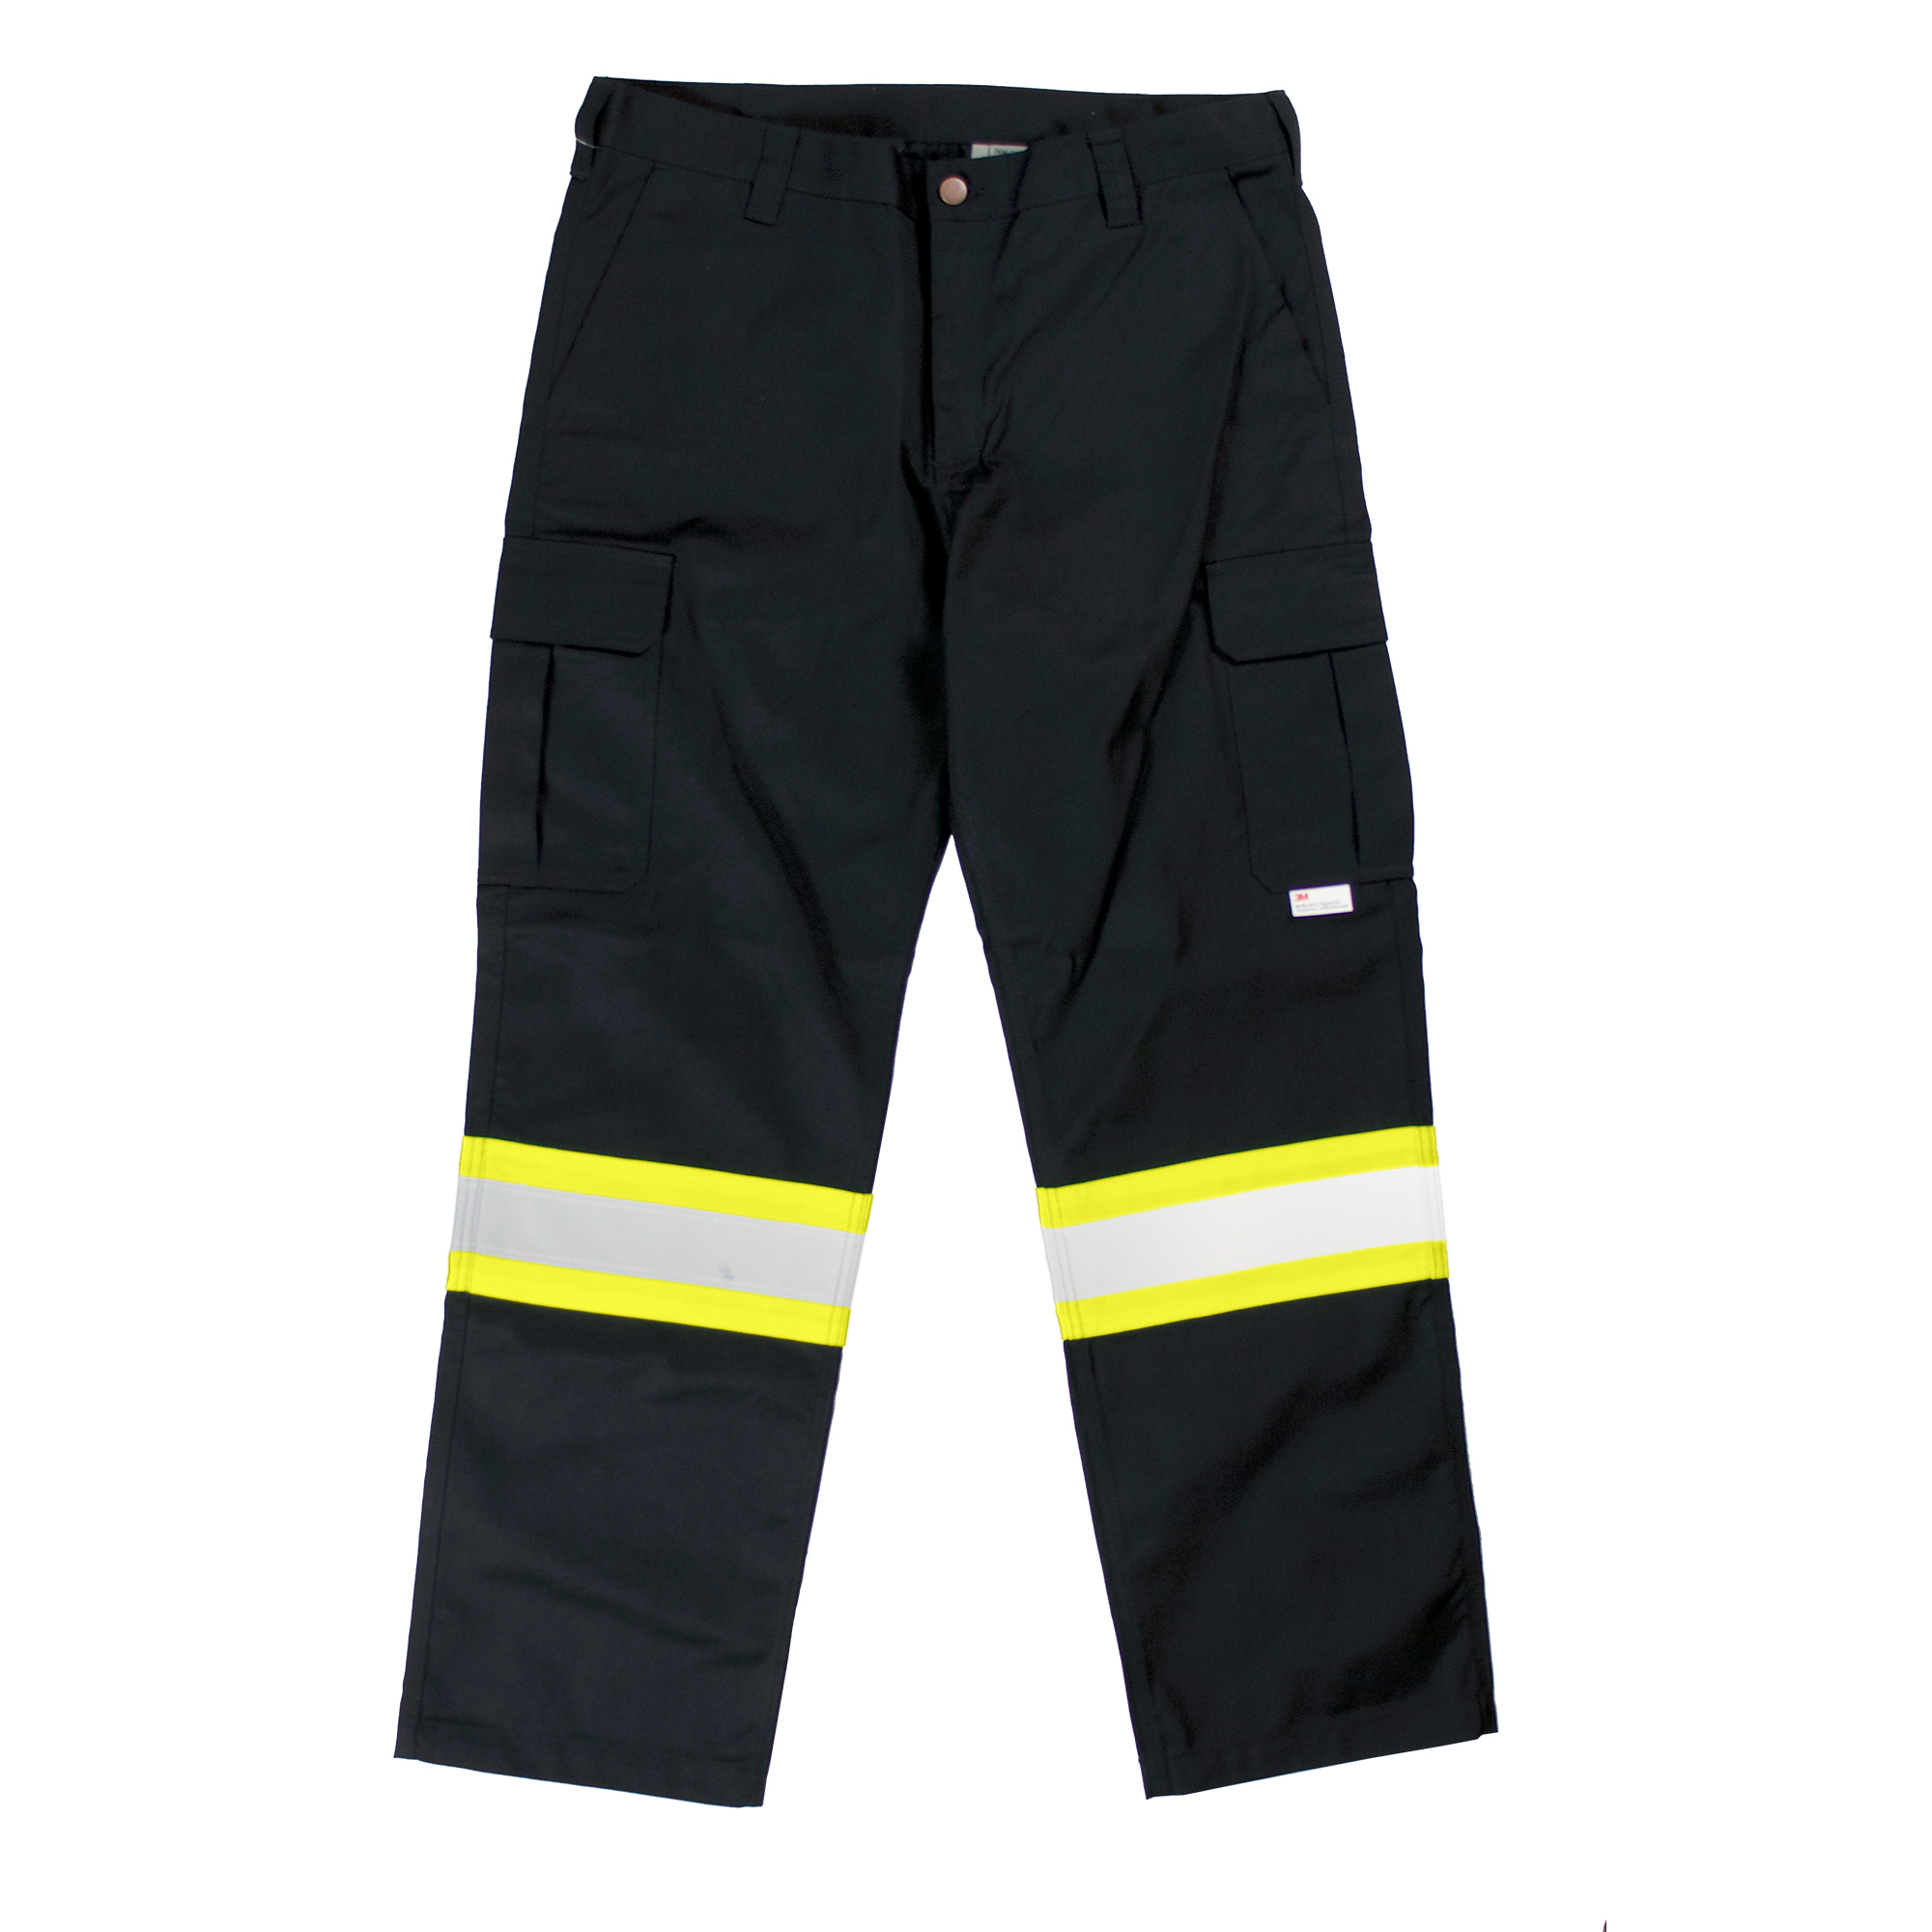 Tough Duck, Safety Cargo Utility Pant, Waist 40 in, Inseam 32 in, Color Black, Model S60711